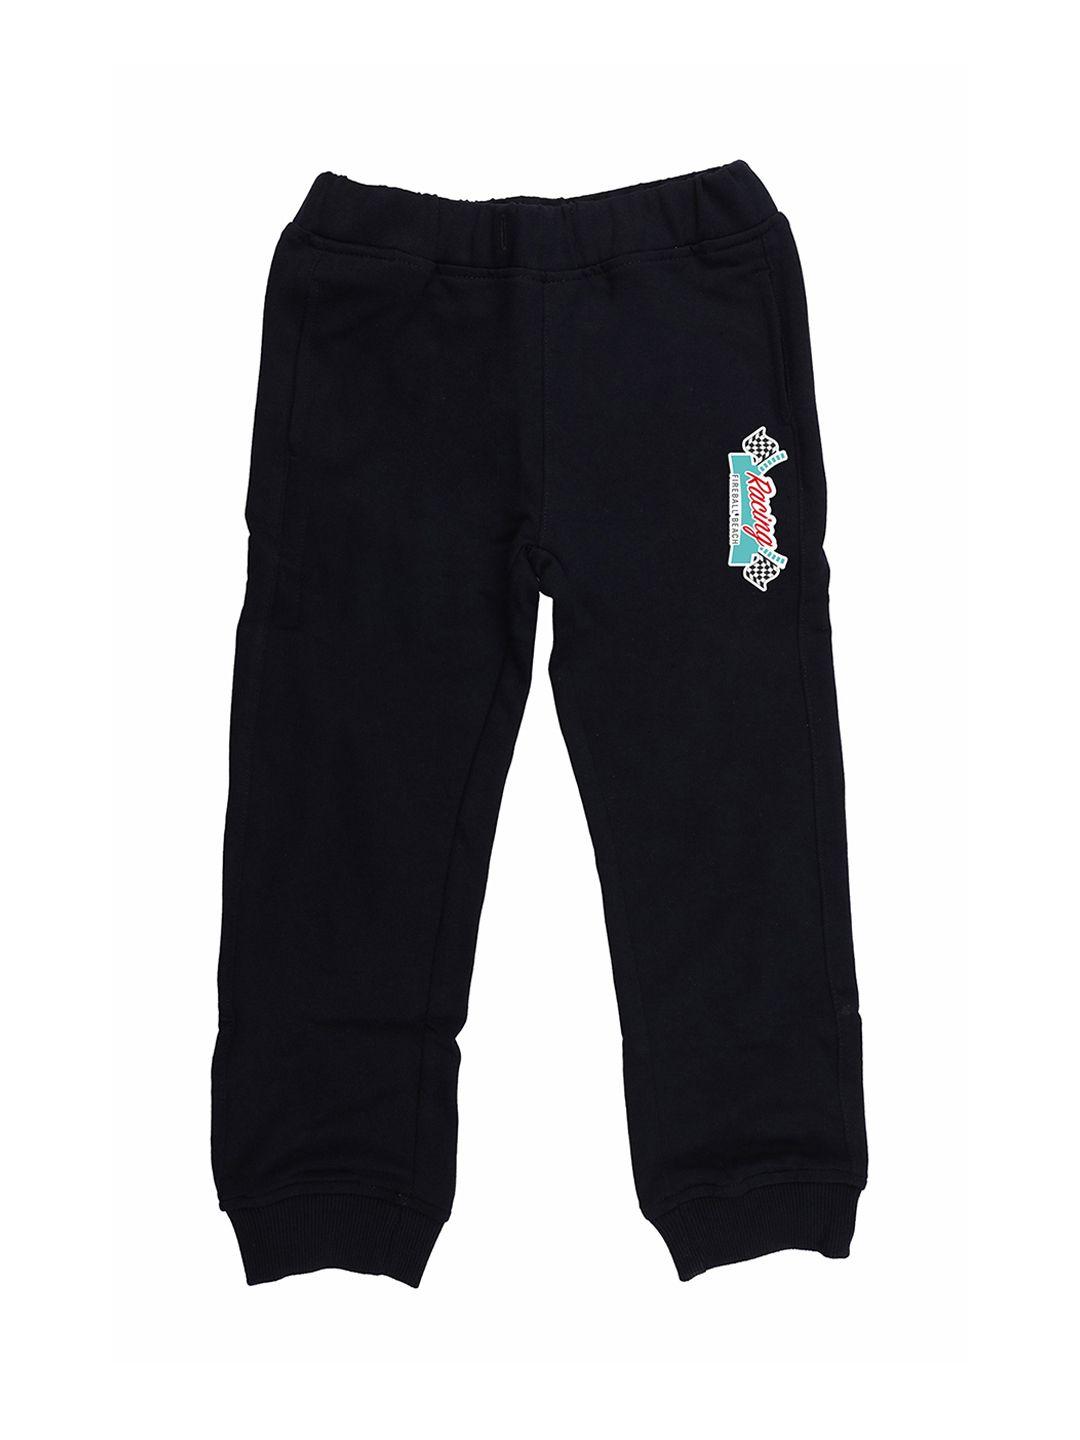 disney by wear your mind kids joggers black solid joggers